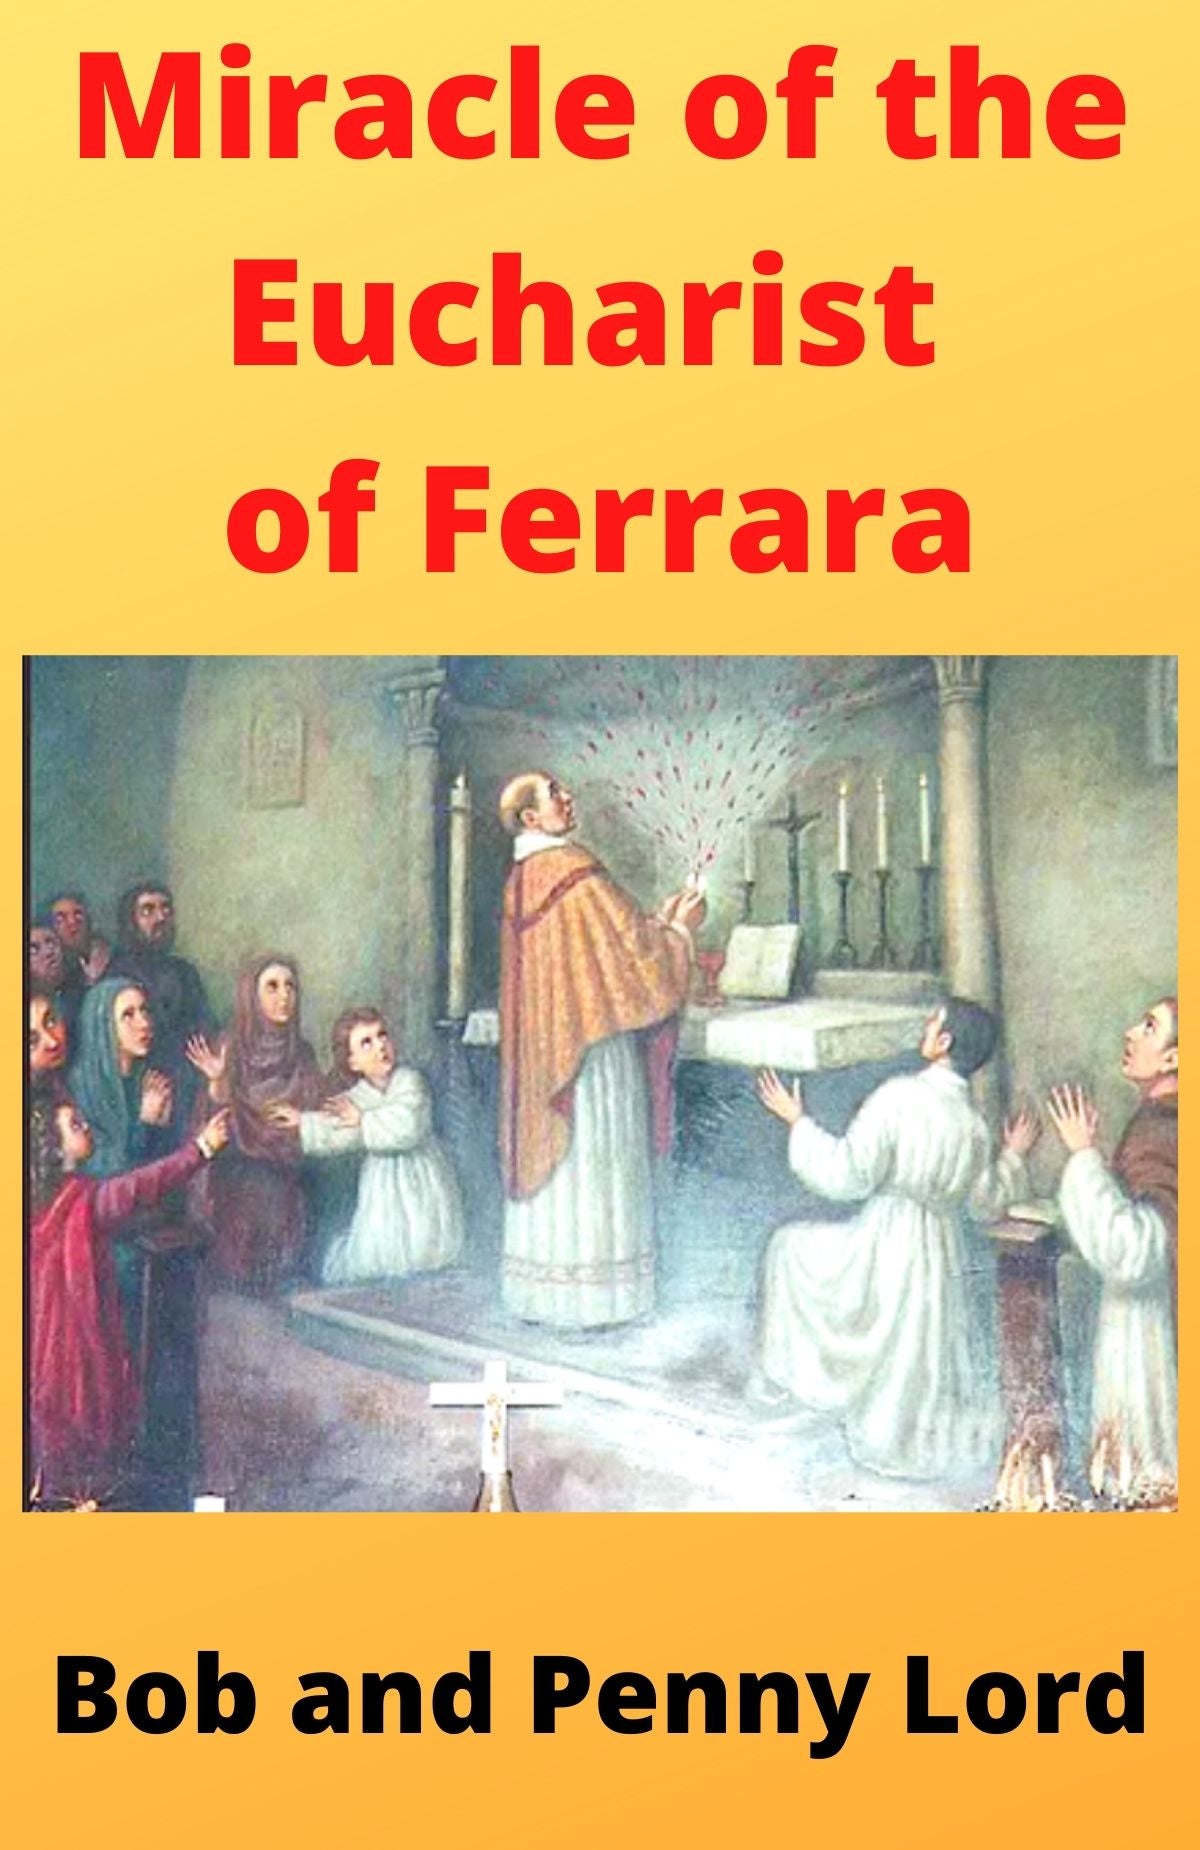 Miracle of the Eucharist of Ferrara, Italy DVD - Bob and Penny Lord